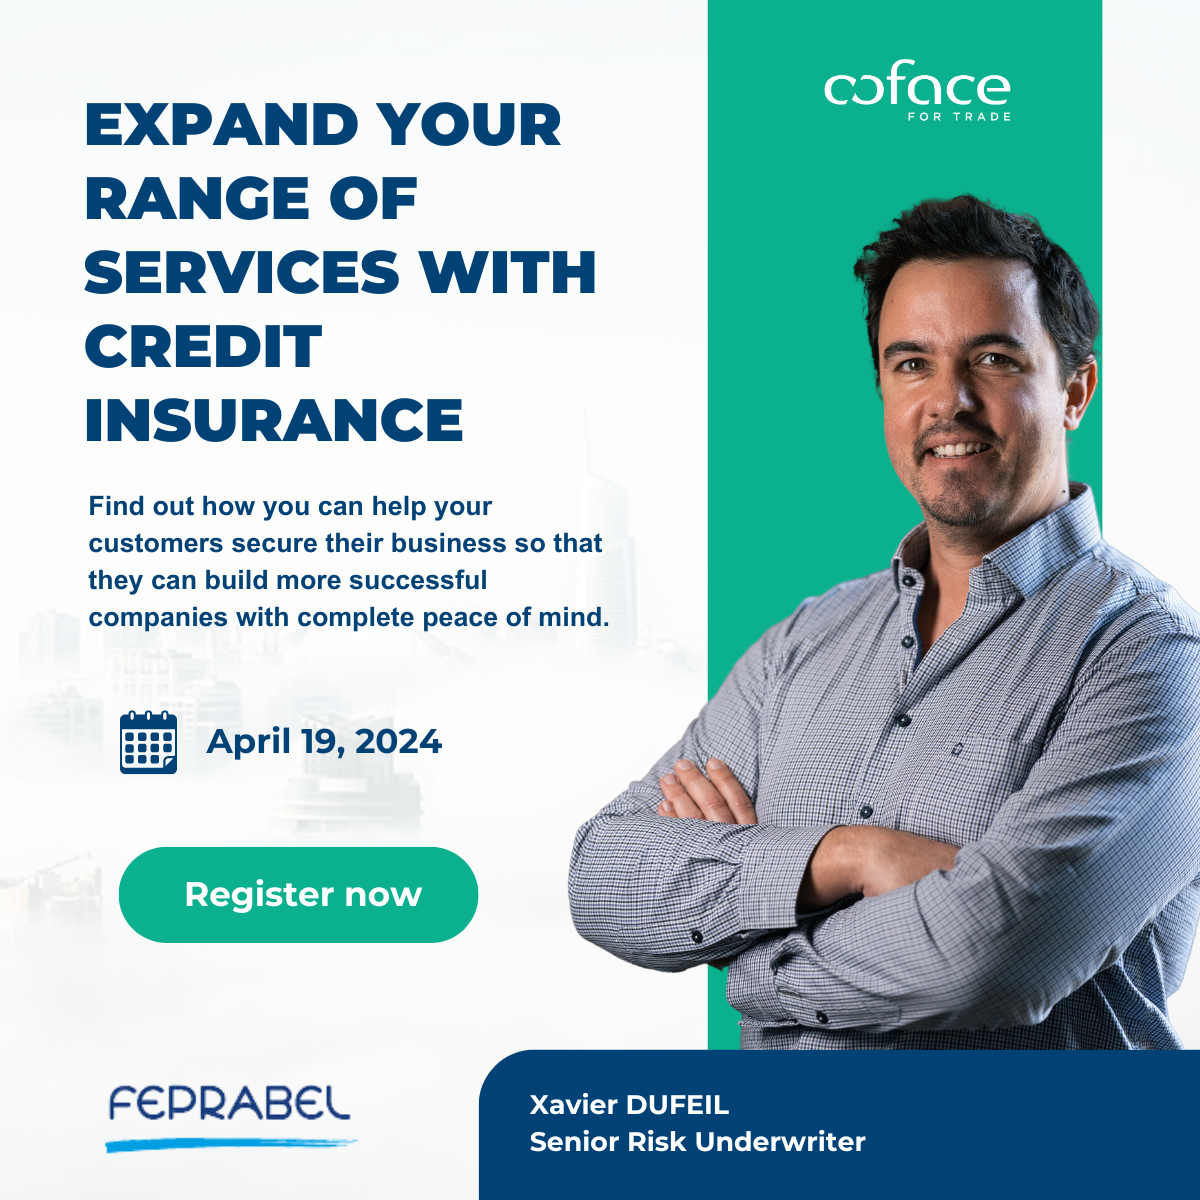 Feprabel Congress: "Expand your range of services with credit insurance" on April 19, with Xavier Dufeil. Register now!